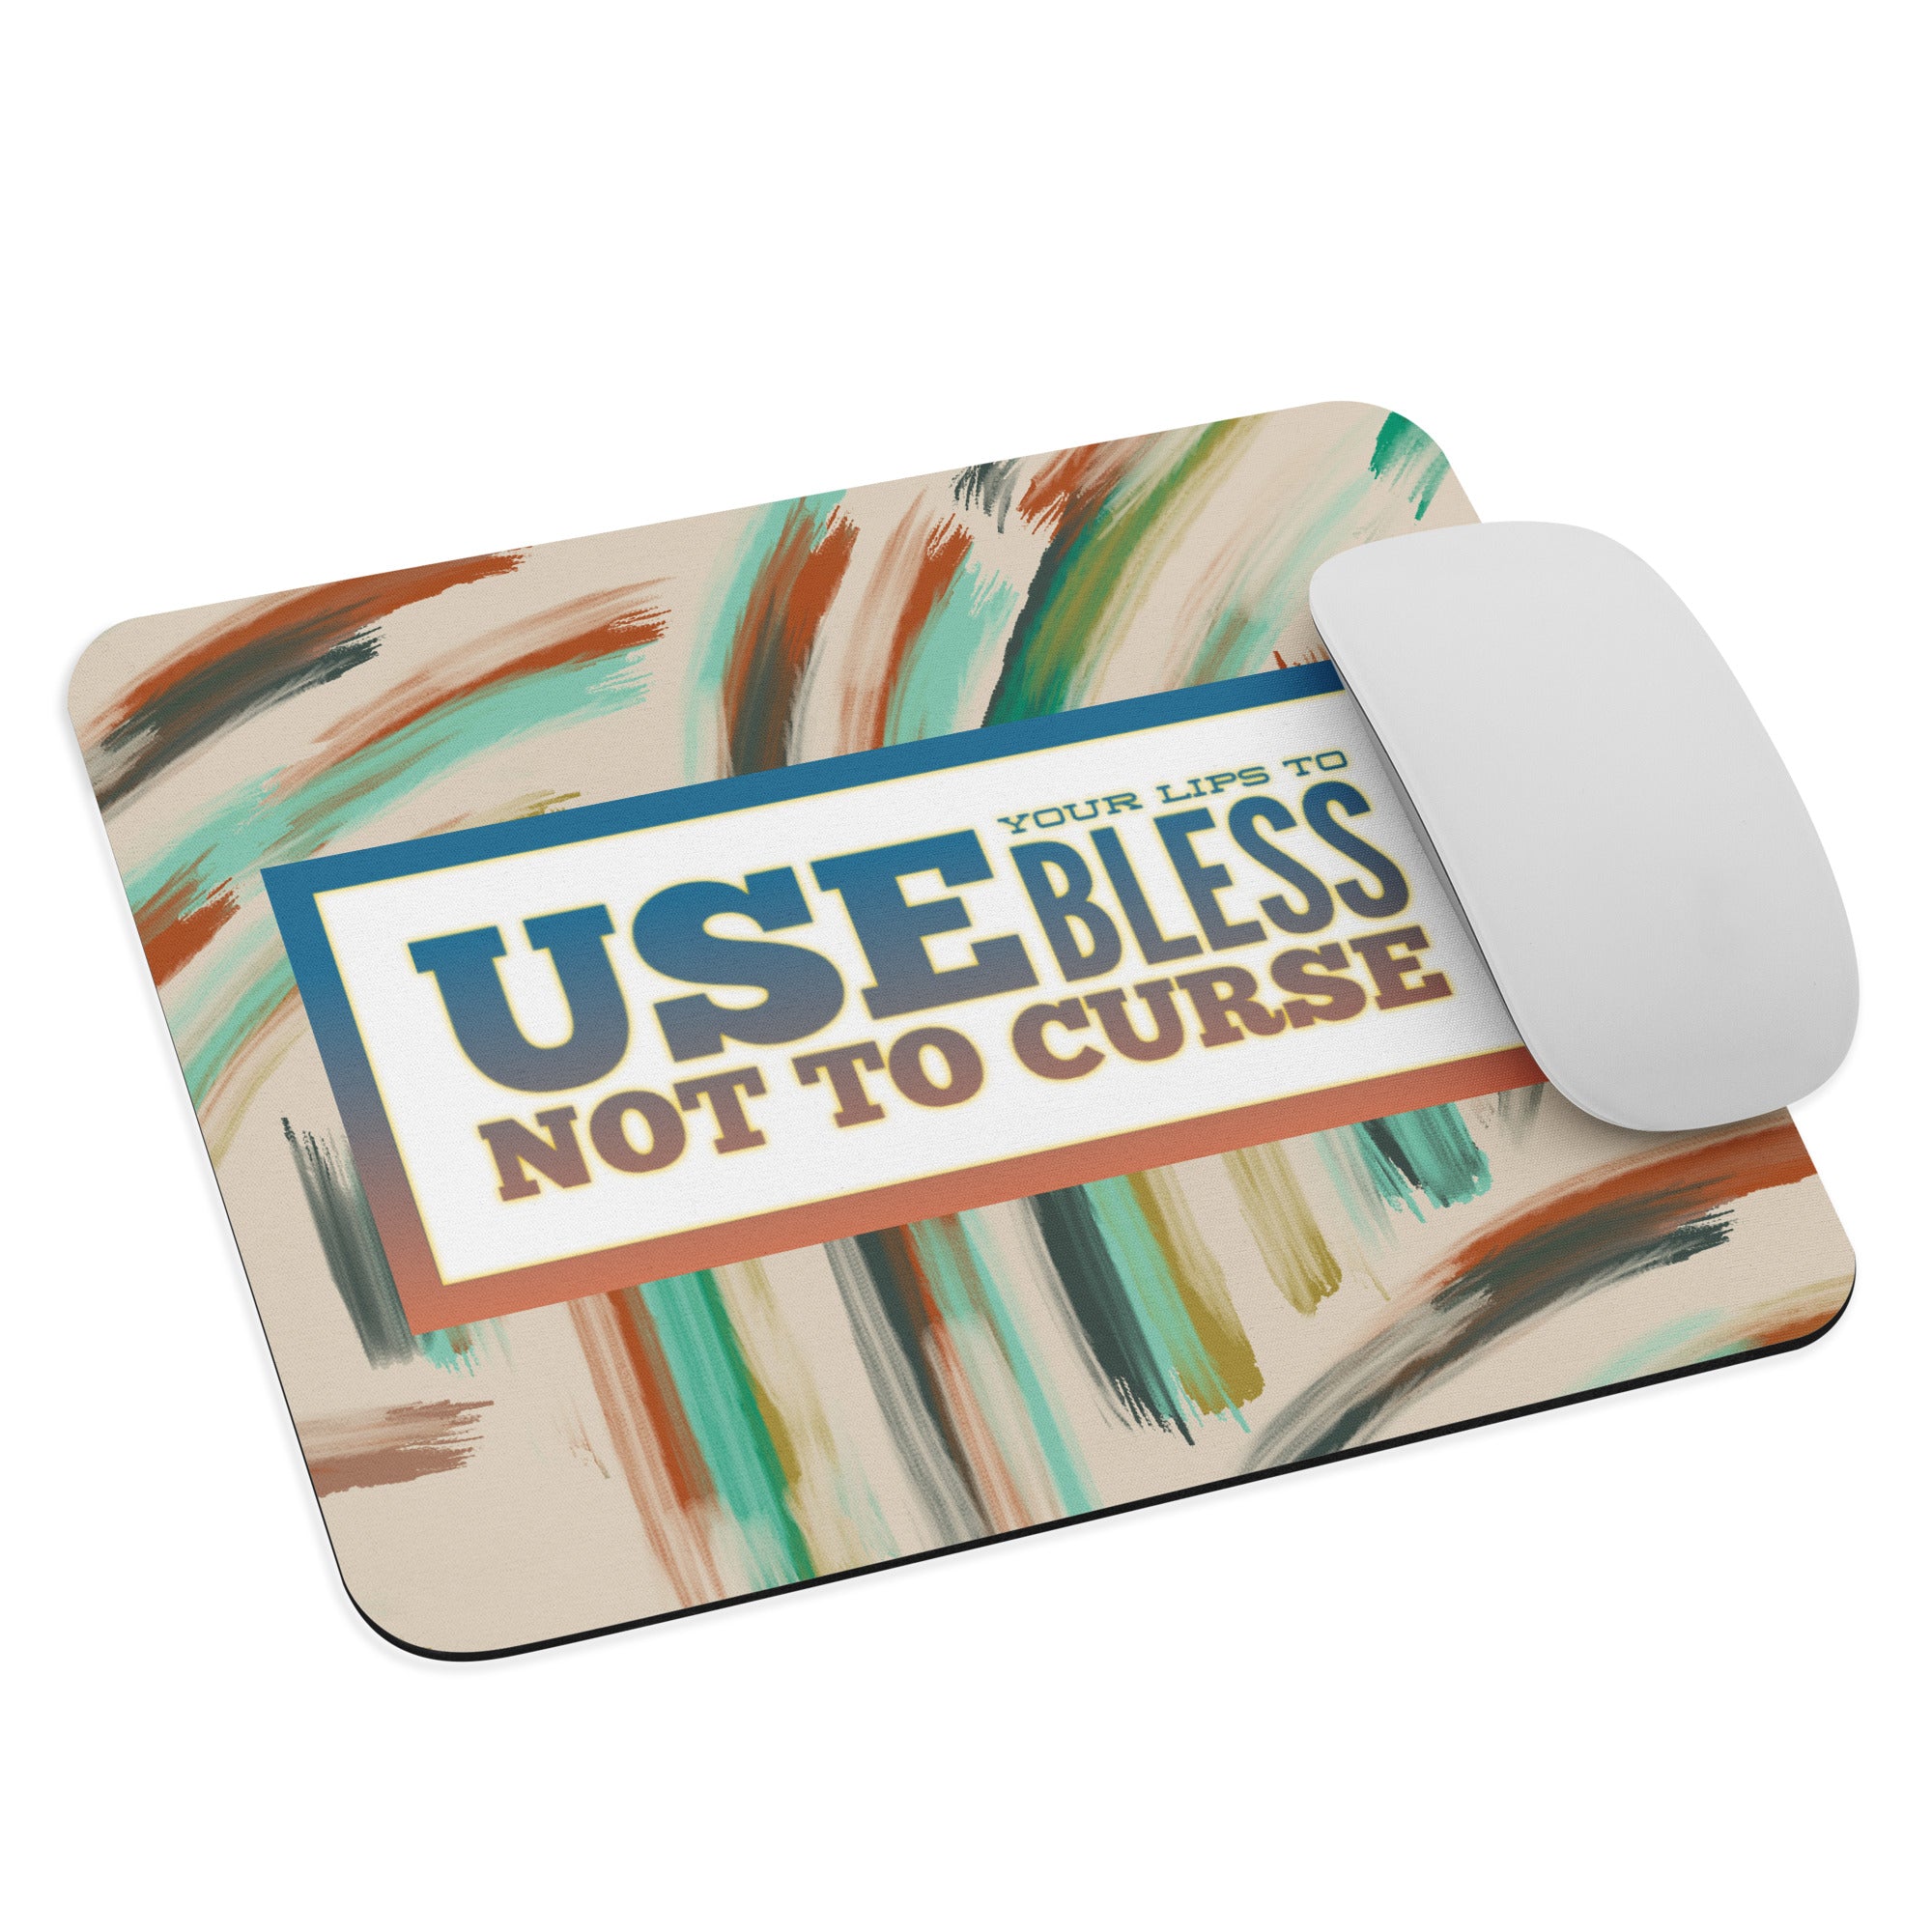 GloWell Designs - Mouse Pad - Motivational Quote - Bless - GloWell Designs